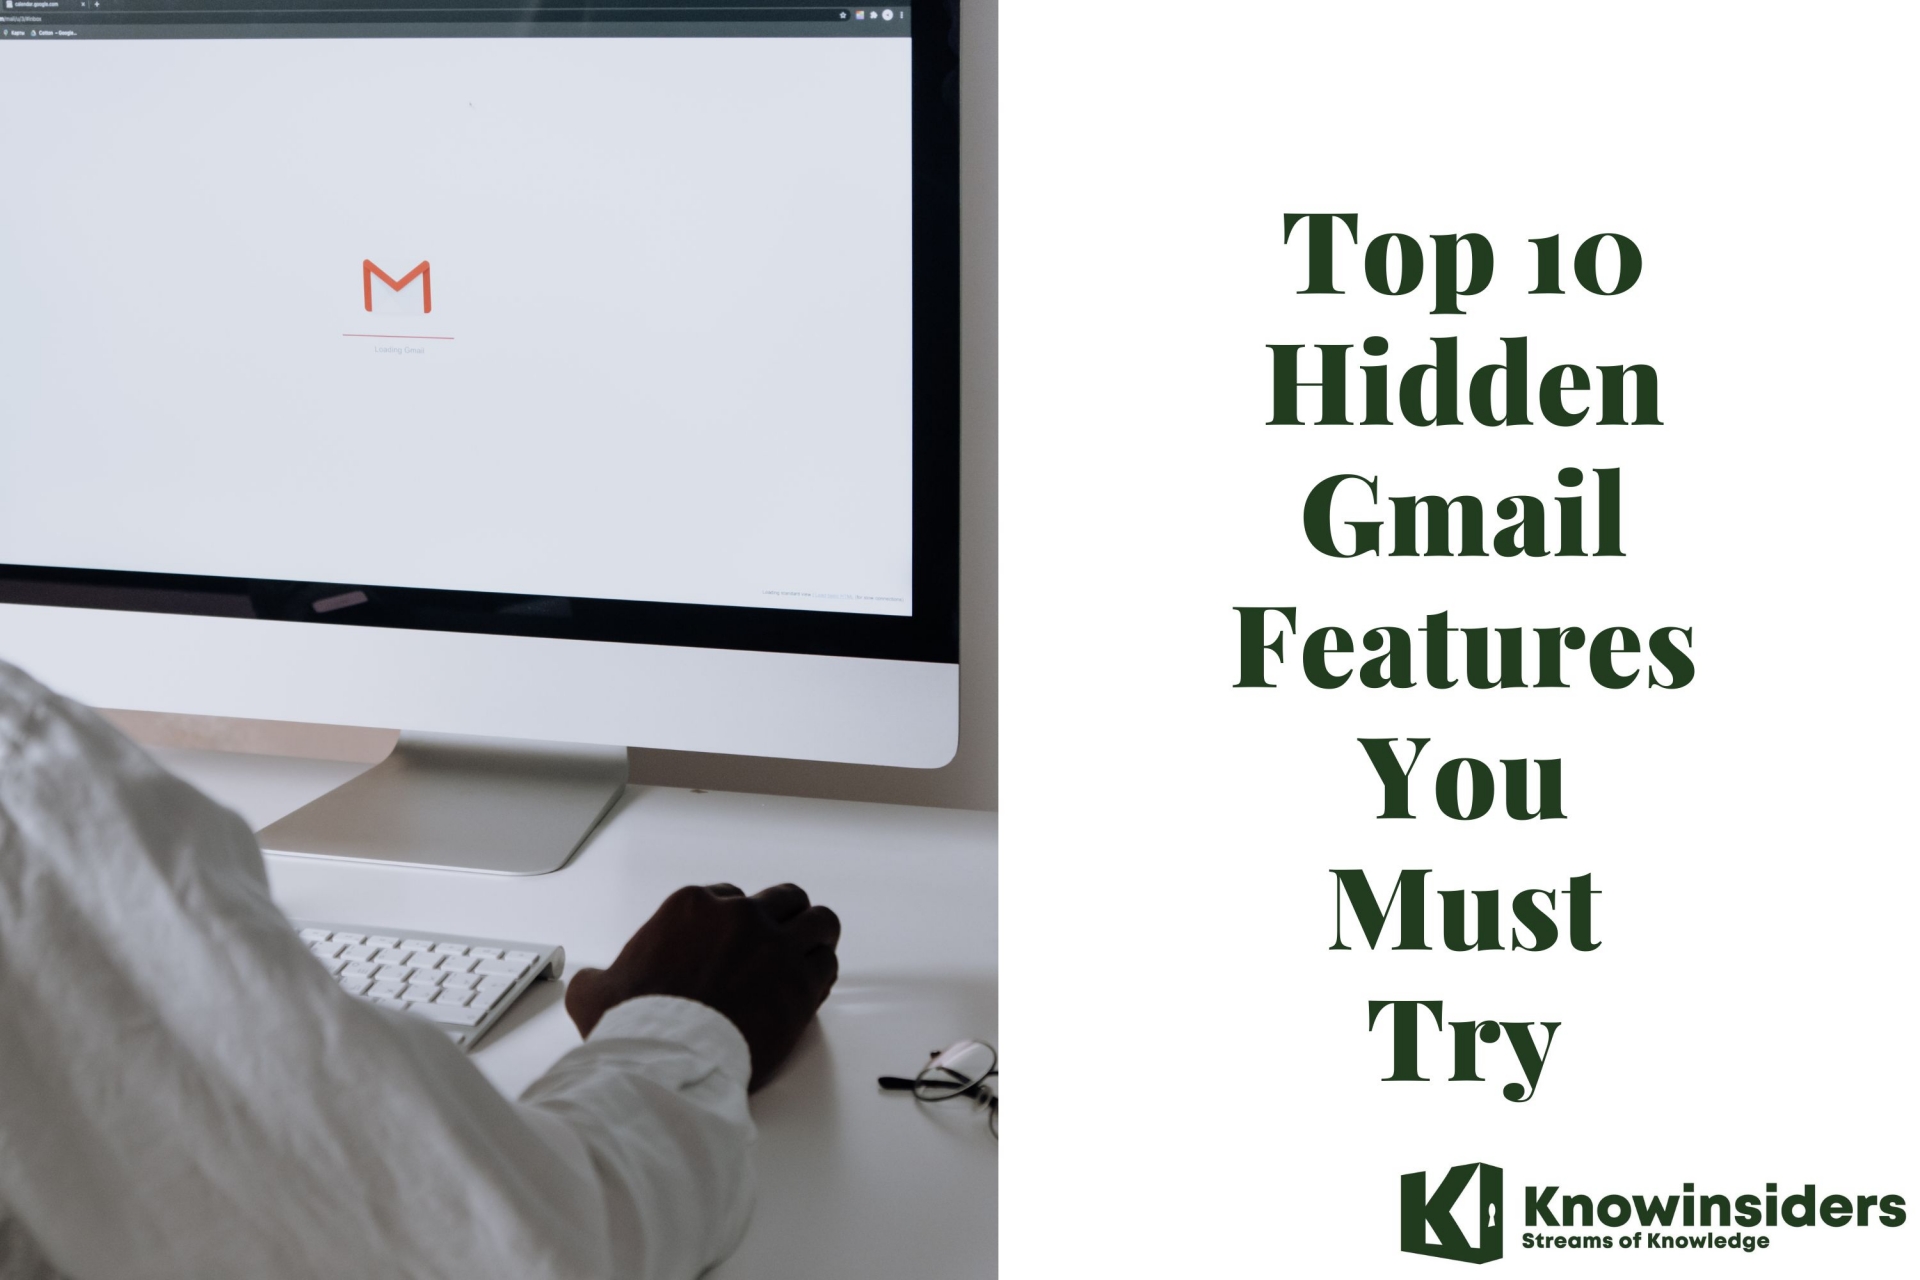 10 Hidden Gmail Features You Must Try